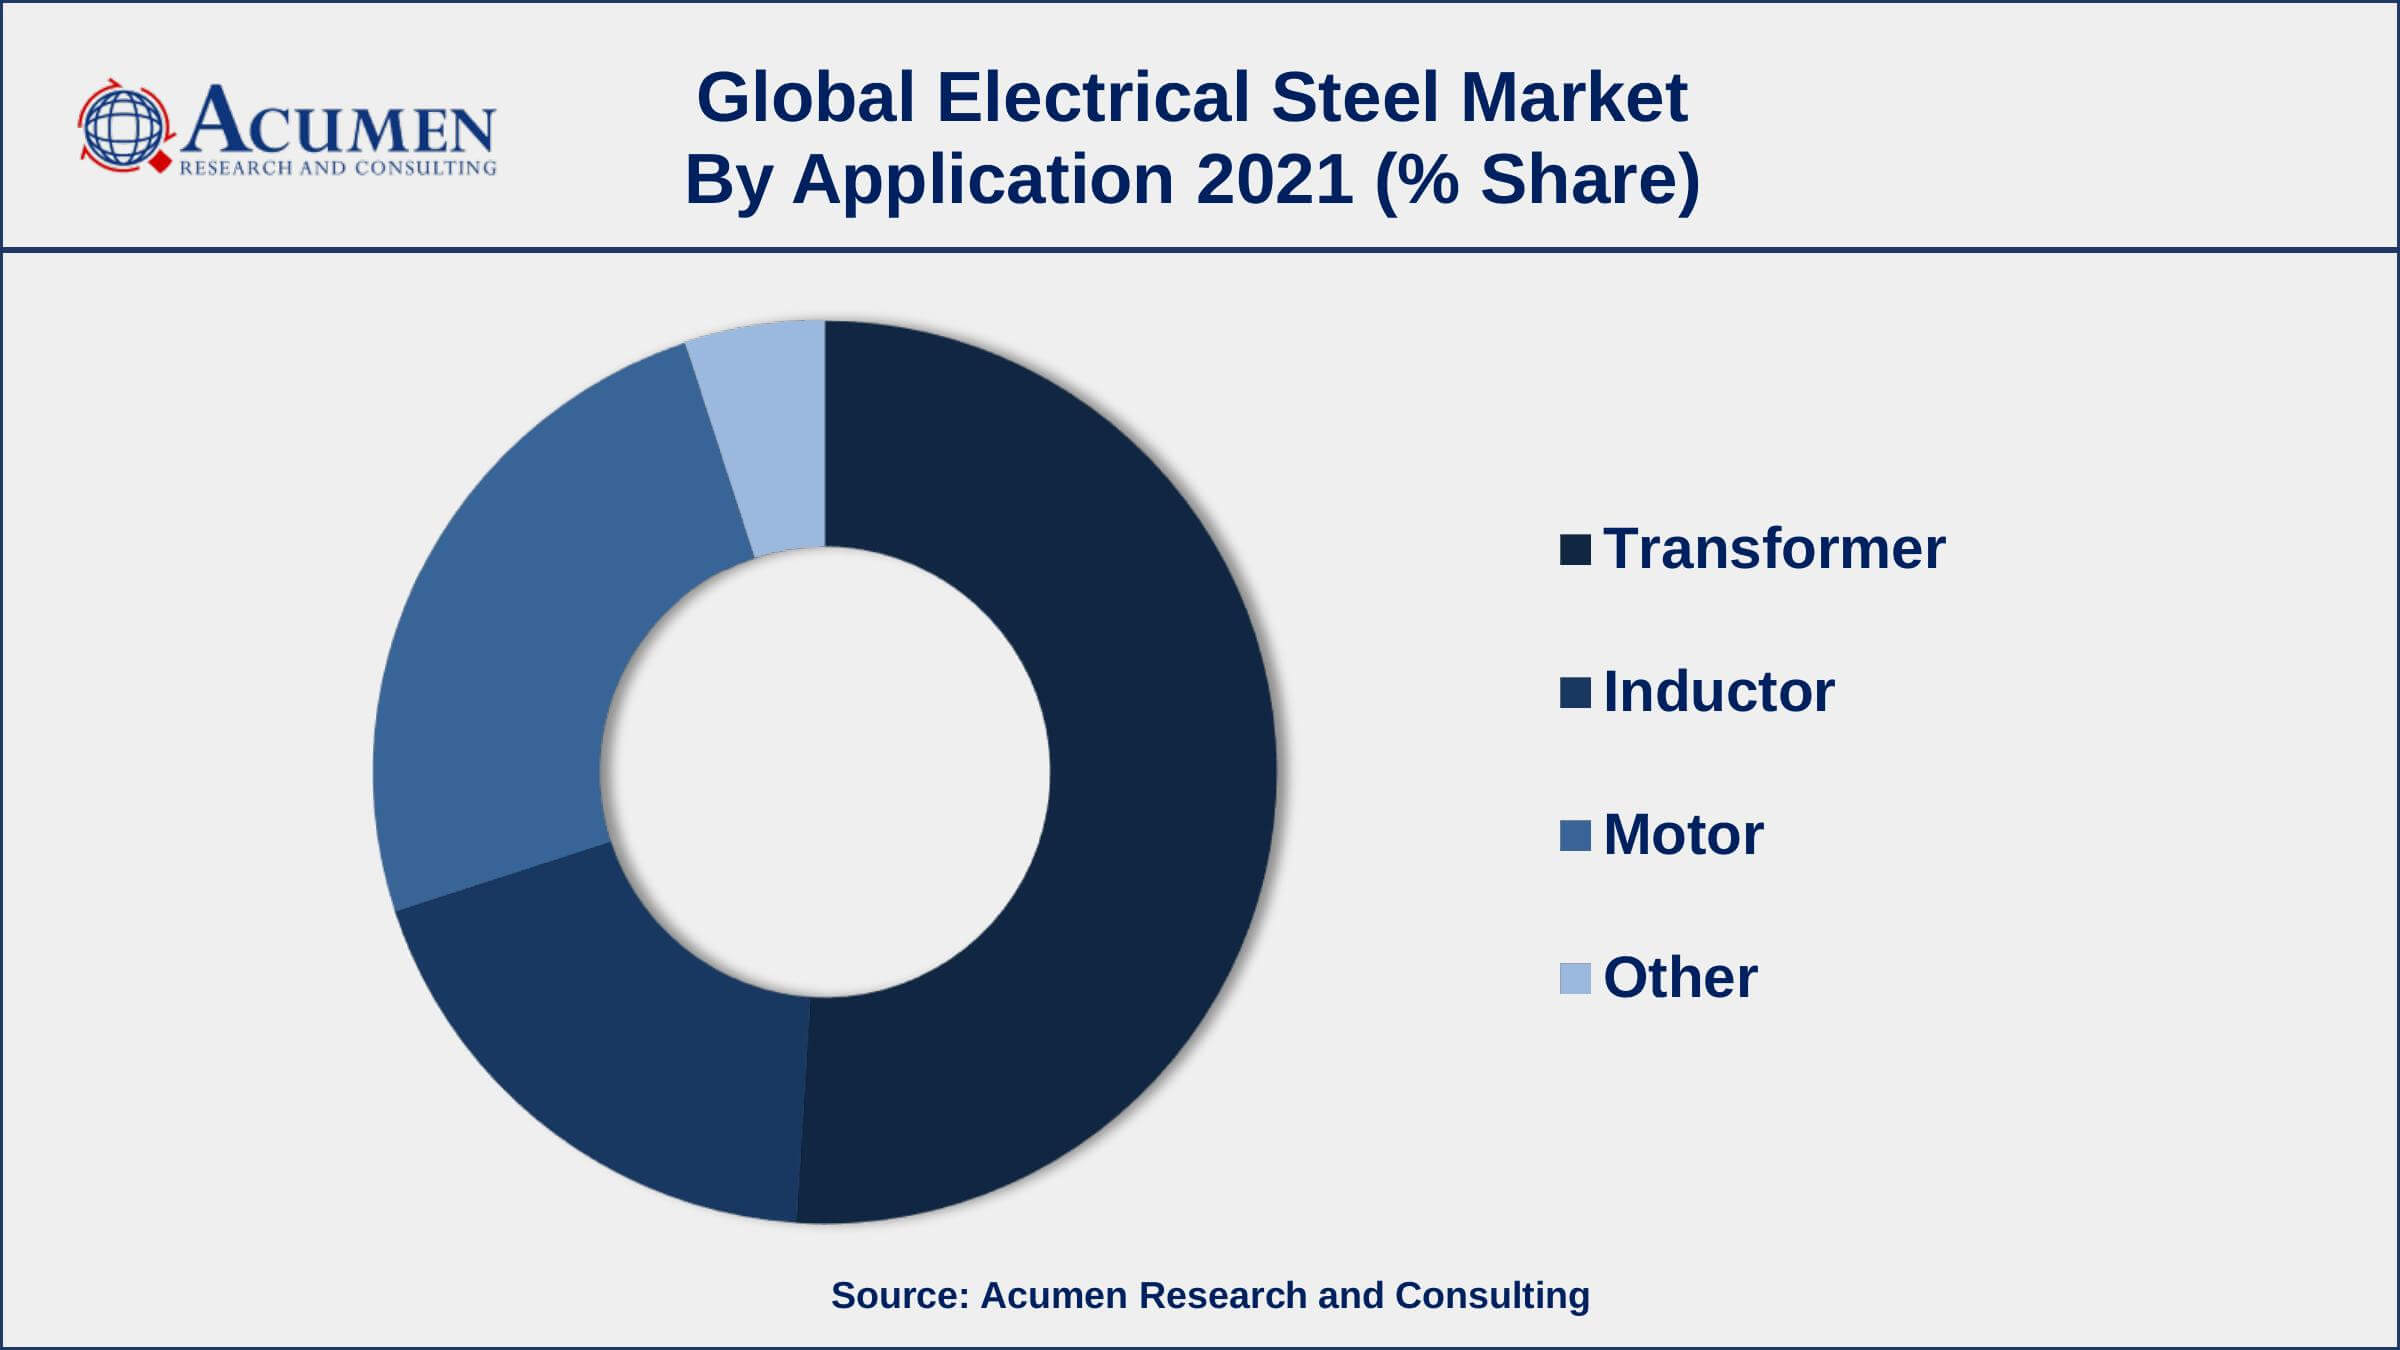 By application, transformer segment engaged more than 51% of the total market share in 2021